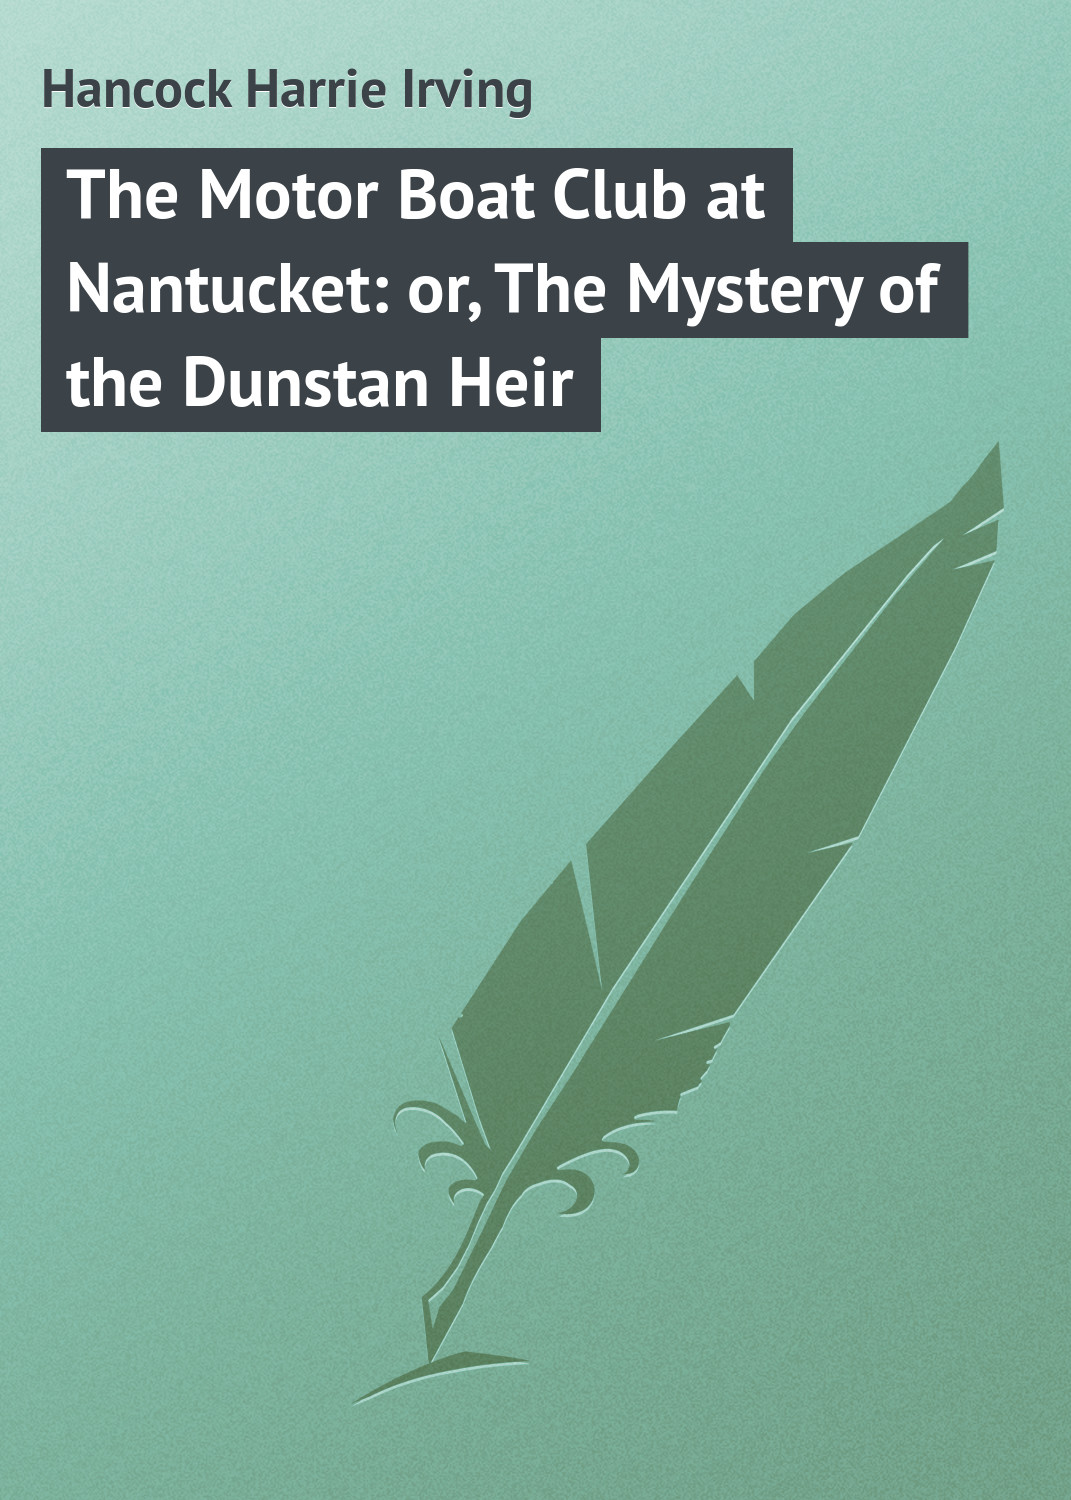 Hancock Harrie Irving The Motor Boat Club at Nantucket: or, The Mystery of the Dunstan Heir